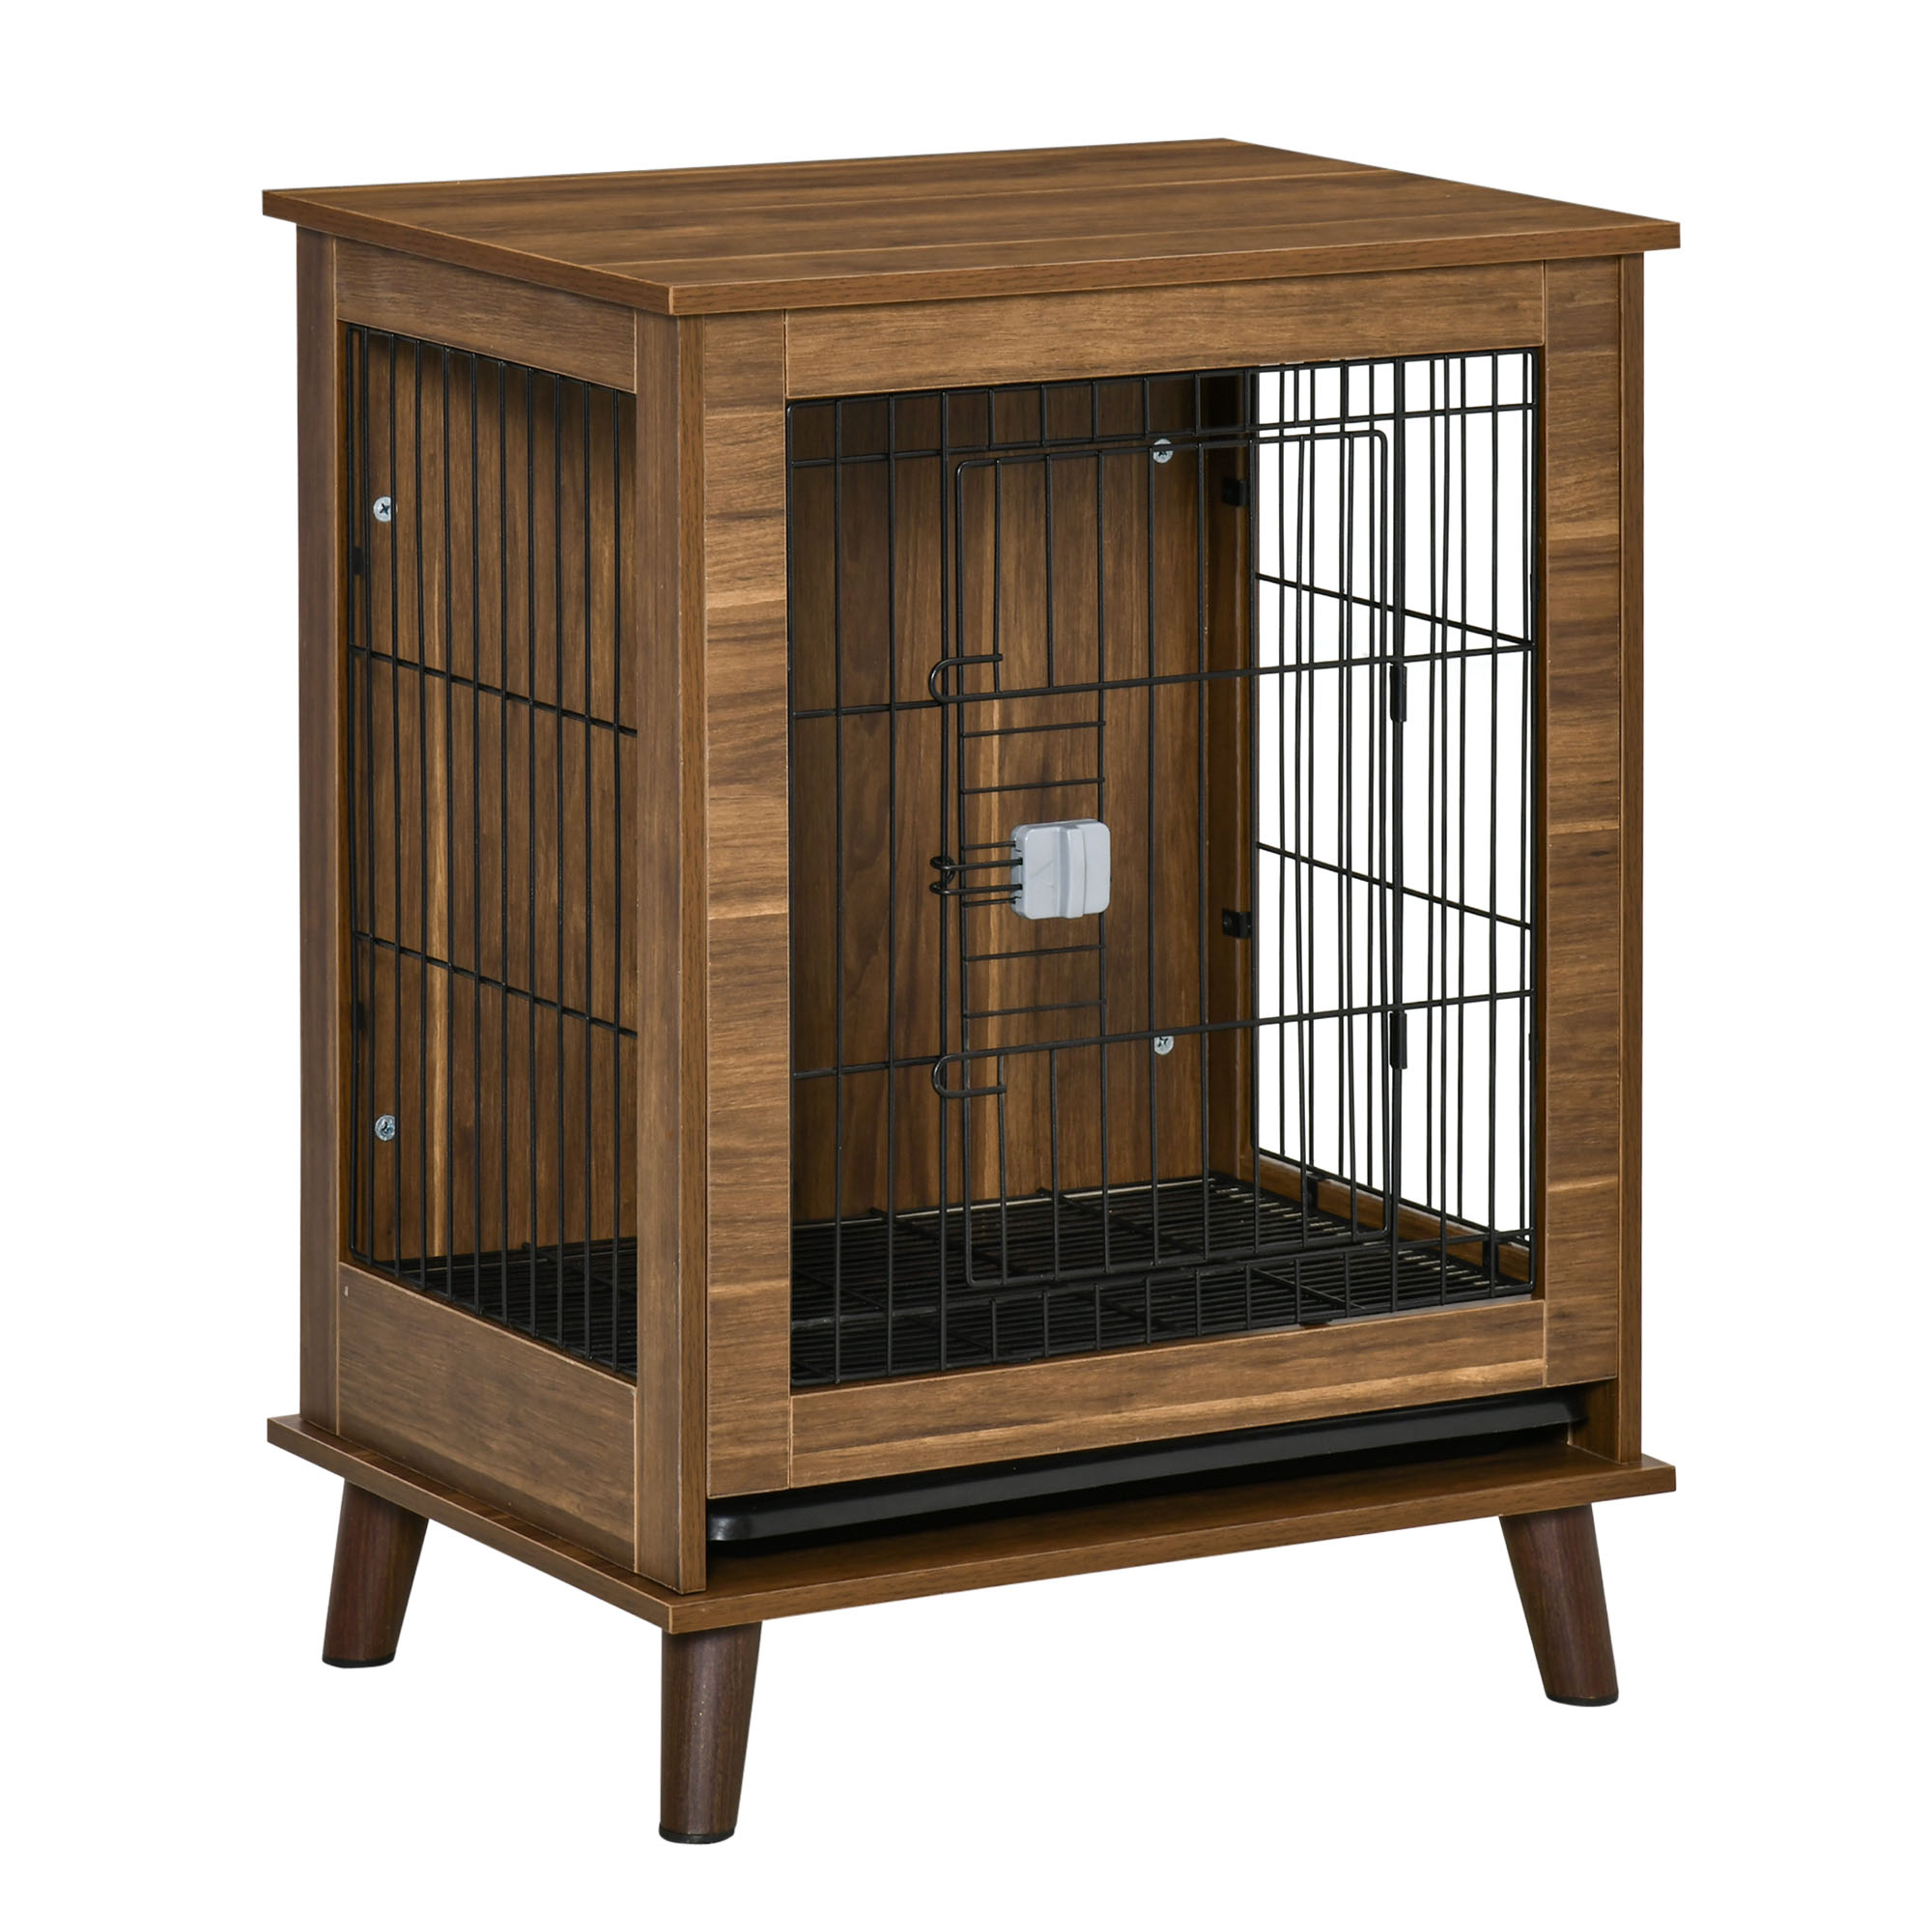 PawHut Stylish Wooden & Wire End Table Dog Kennel with Cushion & Lockable Magnetic Doors for Small Pets Brown   Aosom.com